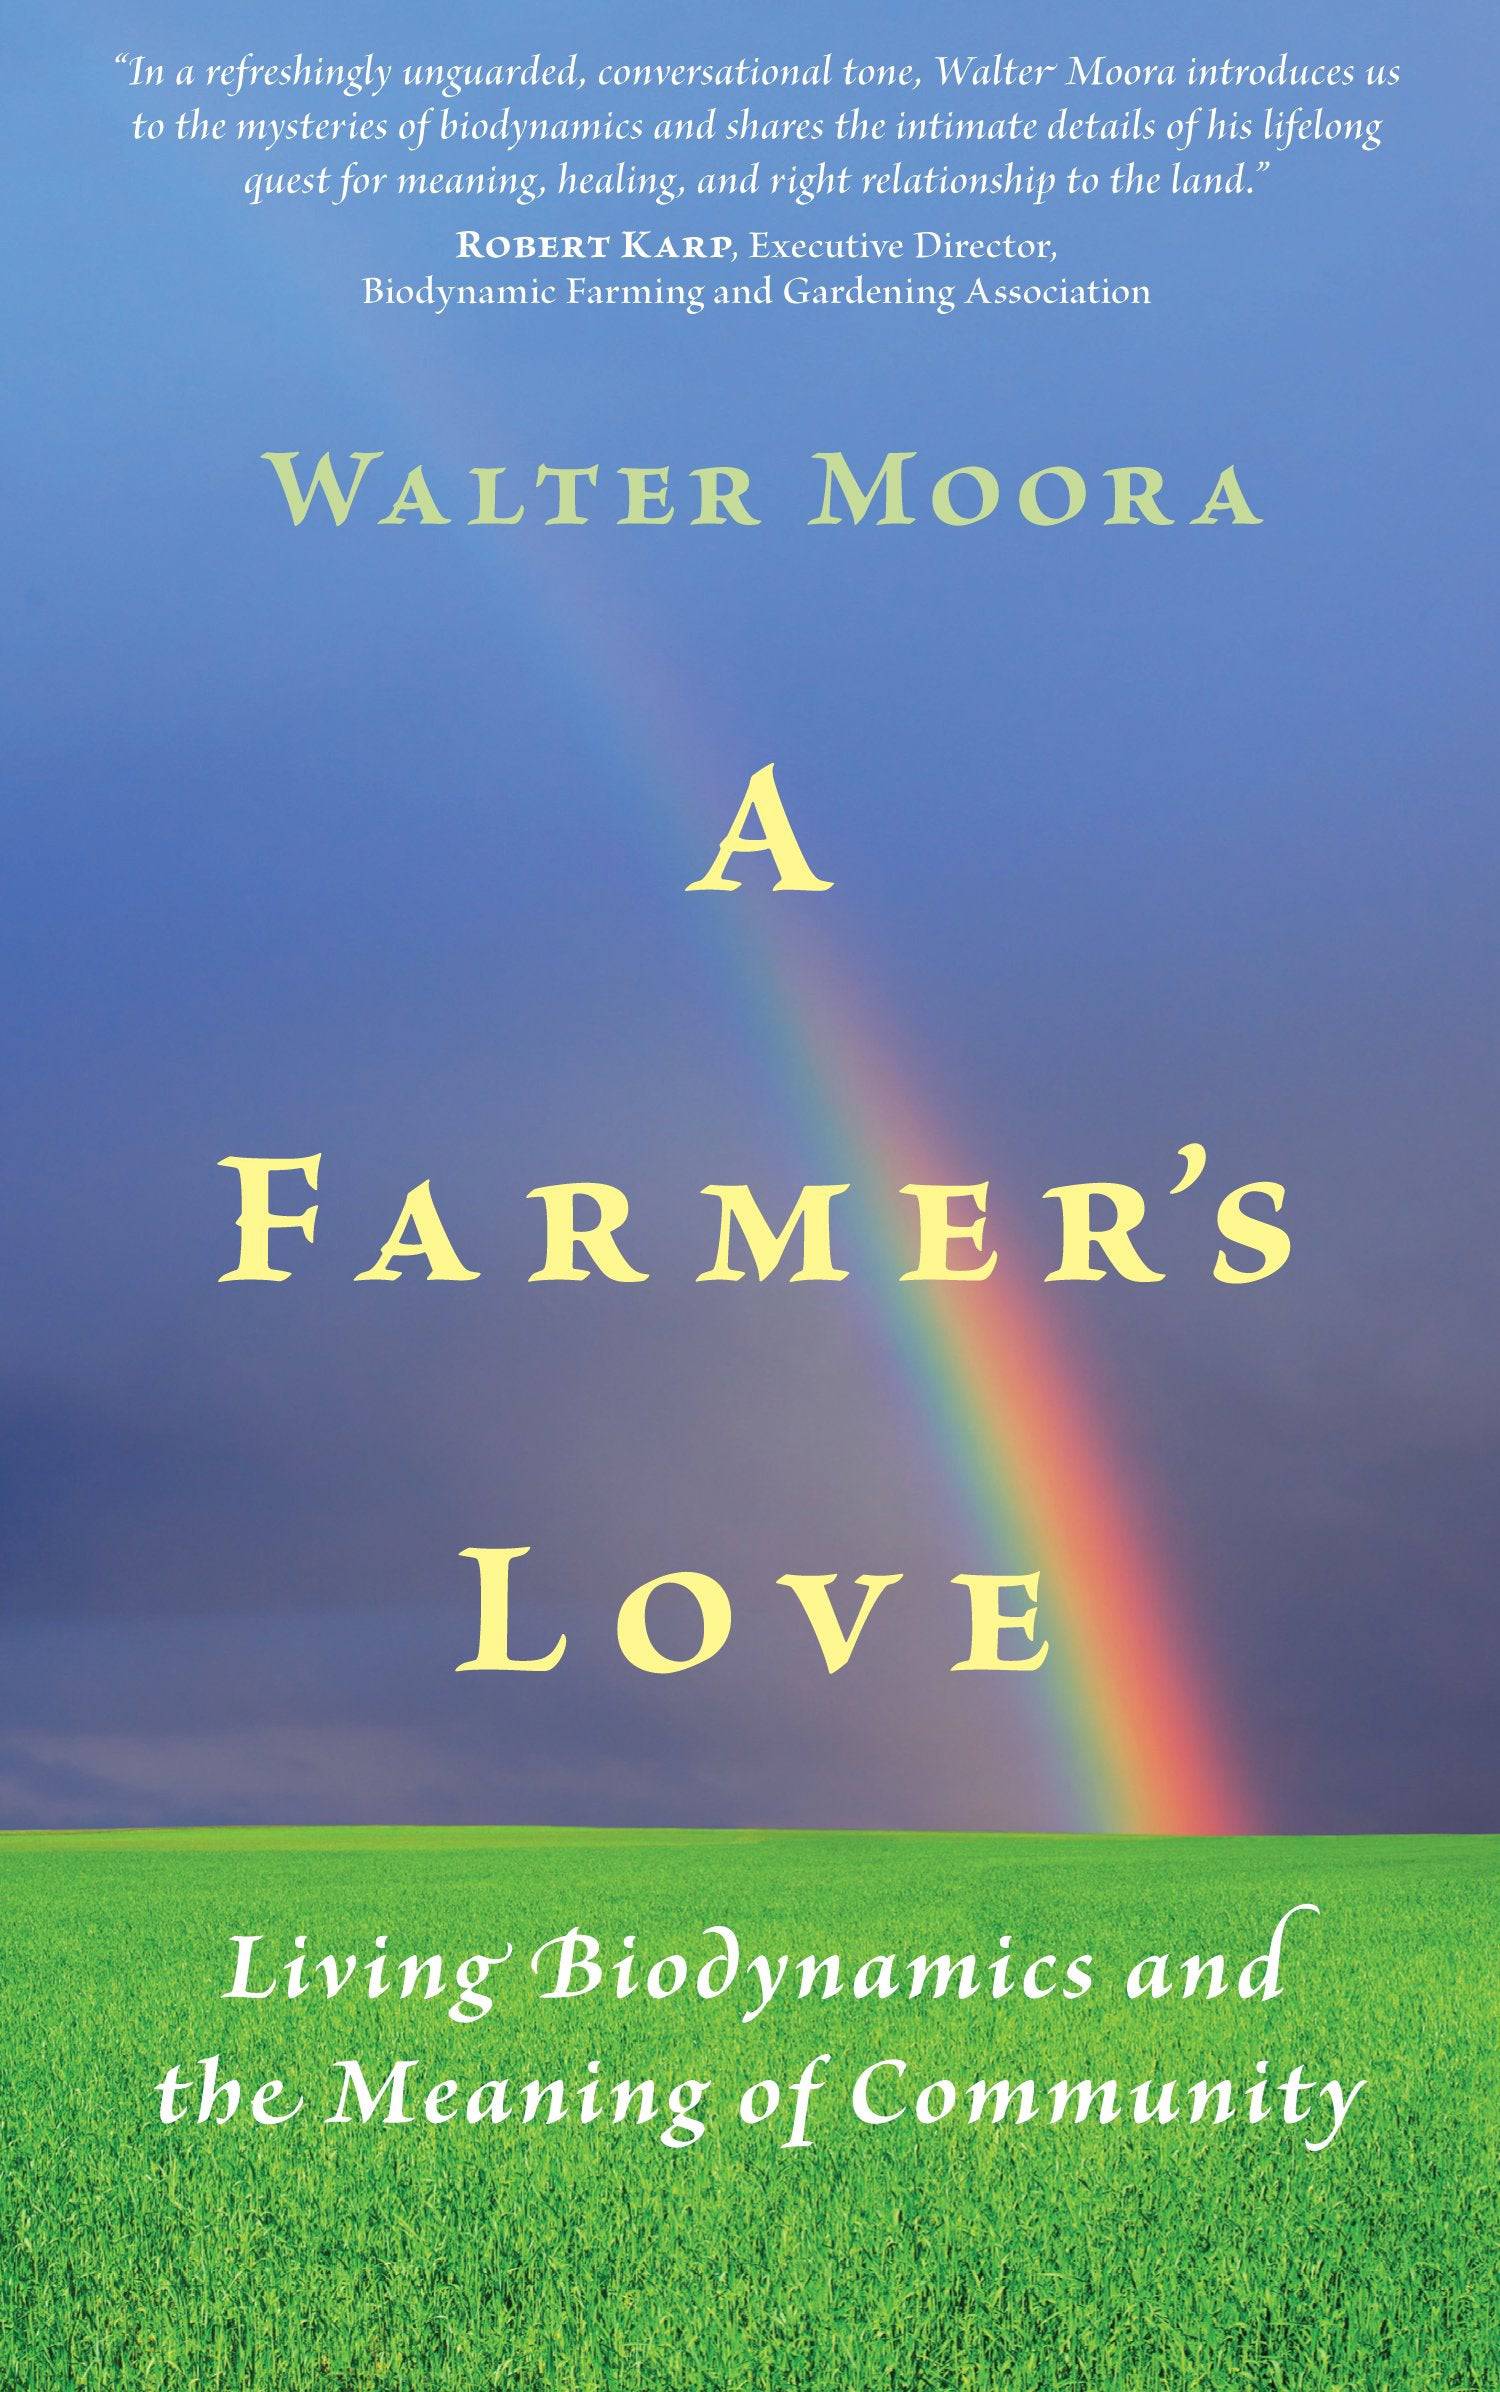 A Farmer's Love: Living Biodynamics and the Meaning of Community by Walter Moora - The Josephine Porter Institute